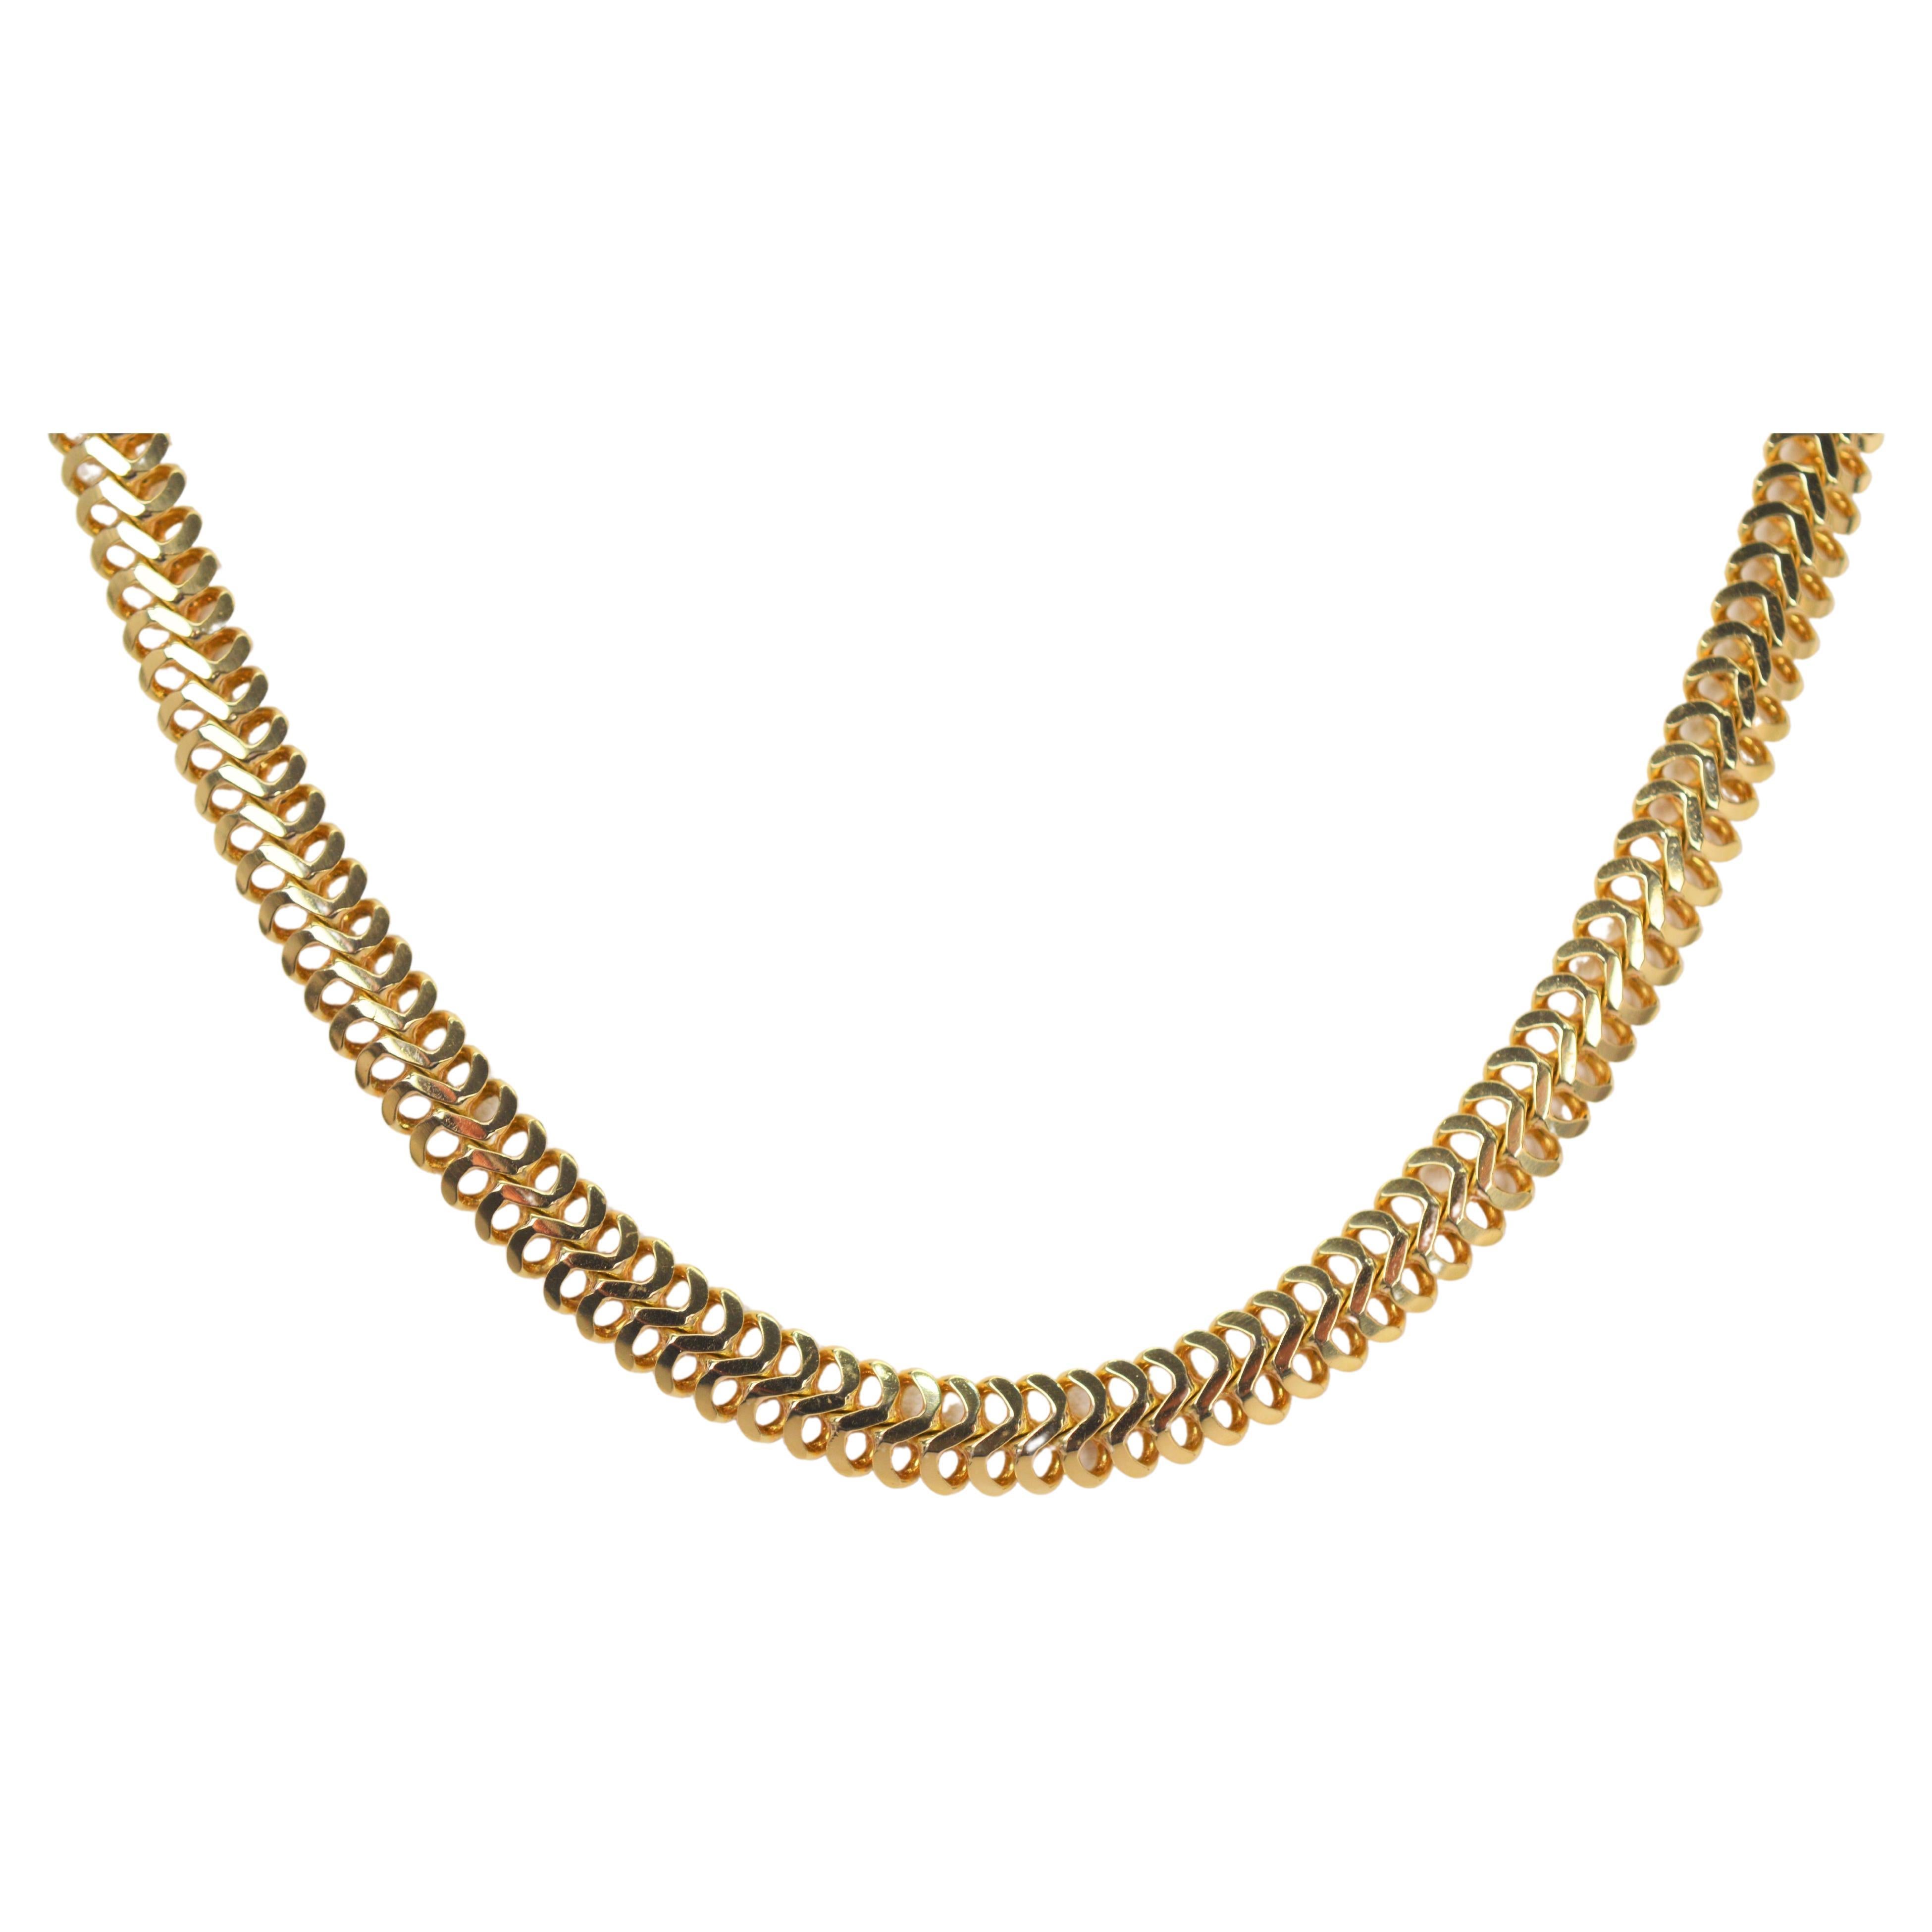 20 pennyweight gold chain